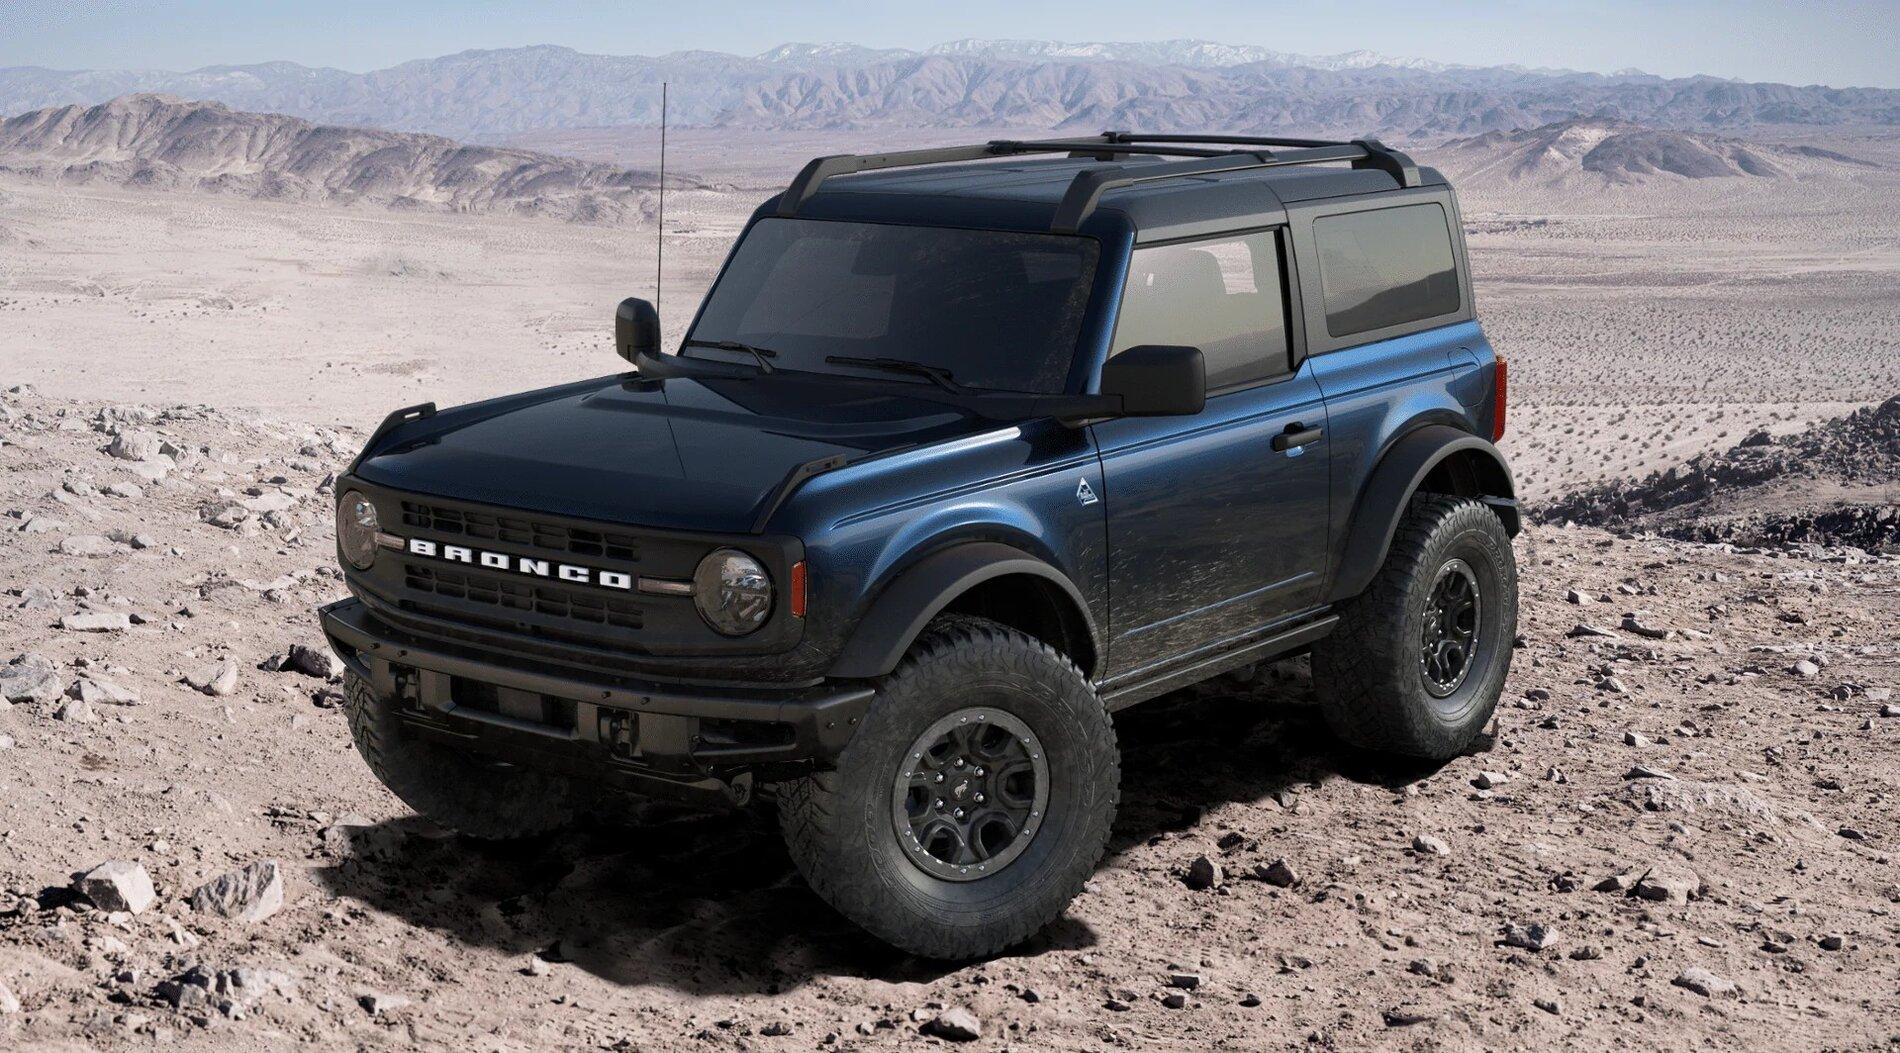 Ford Bronco What picture made it your choice of color ? 2021 Ford Bronco Black Diamond